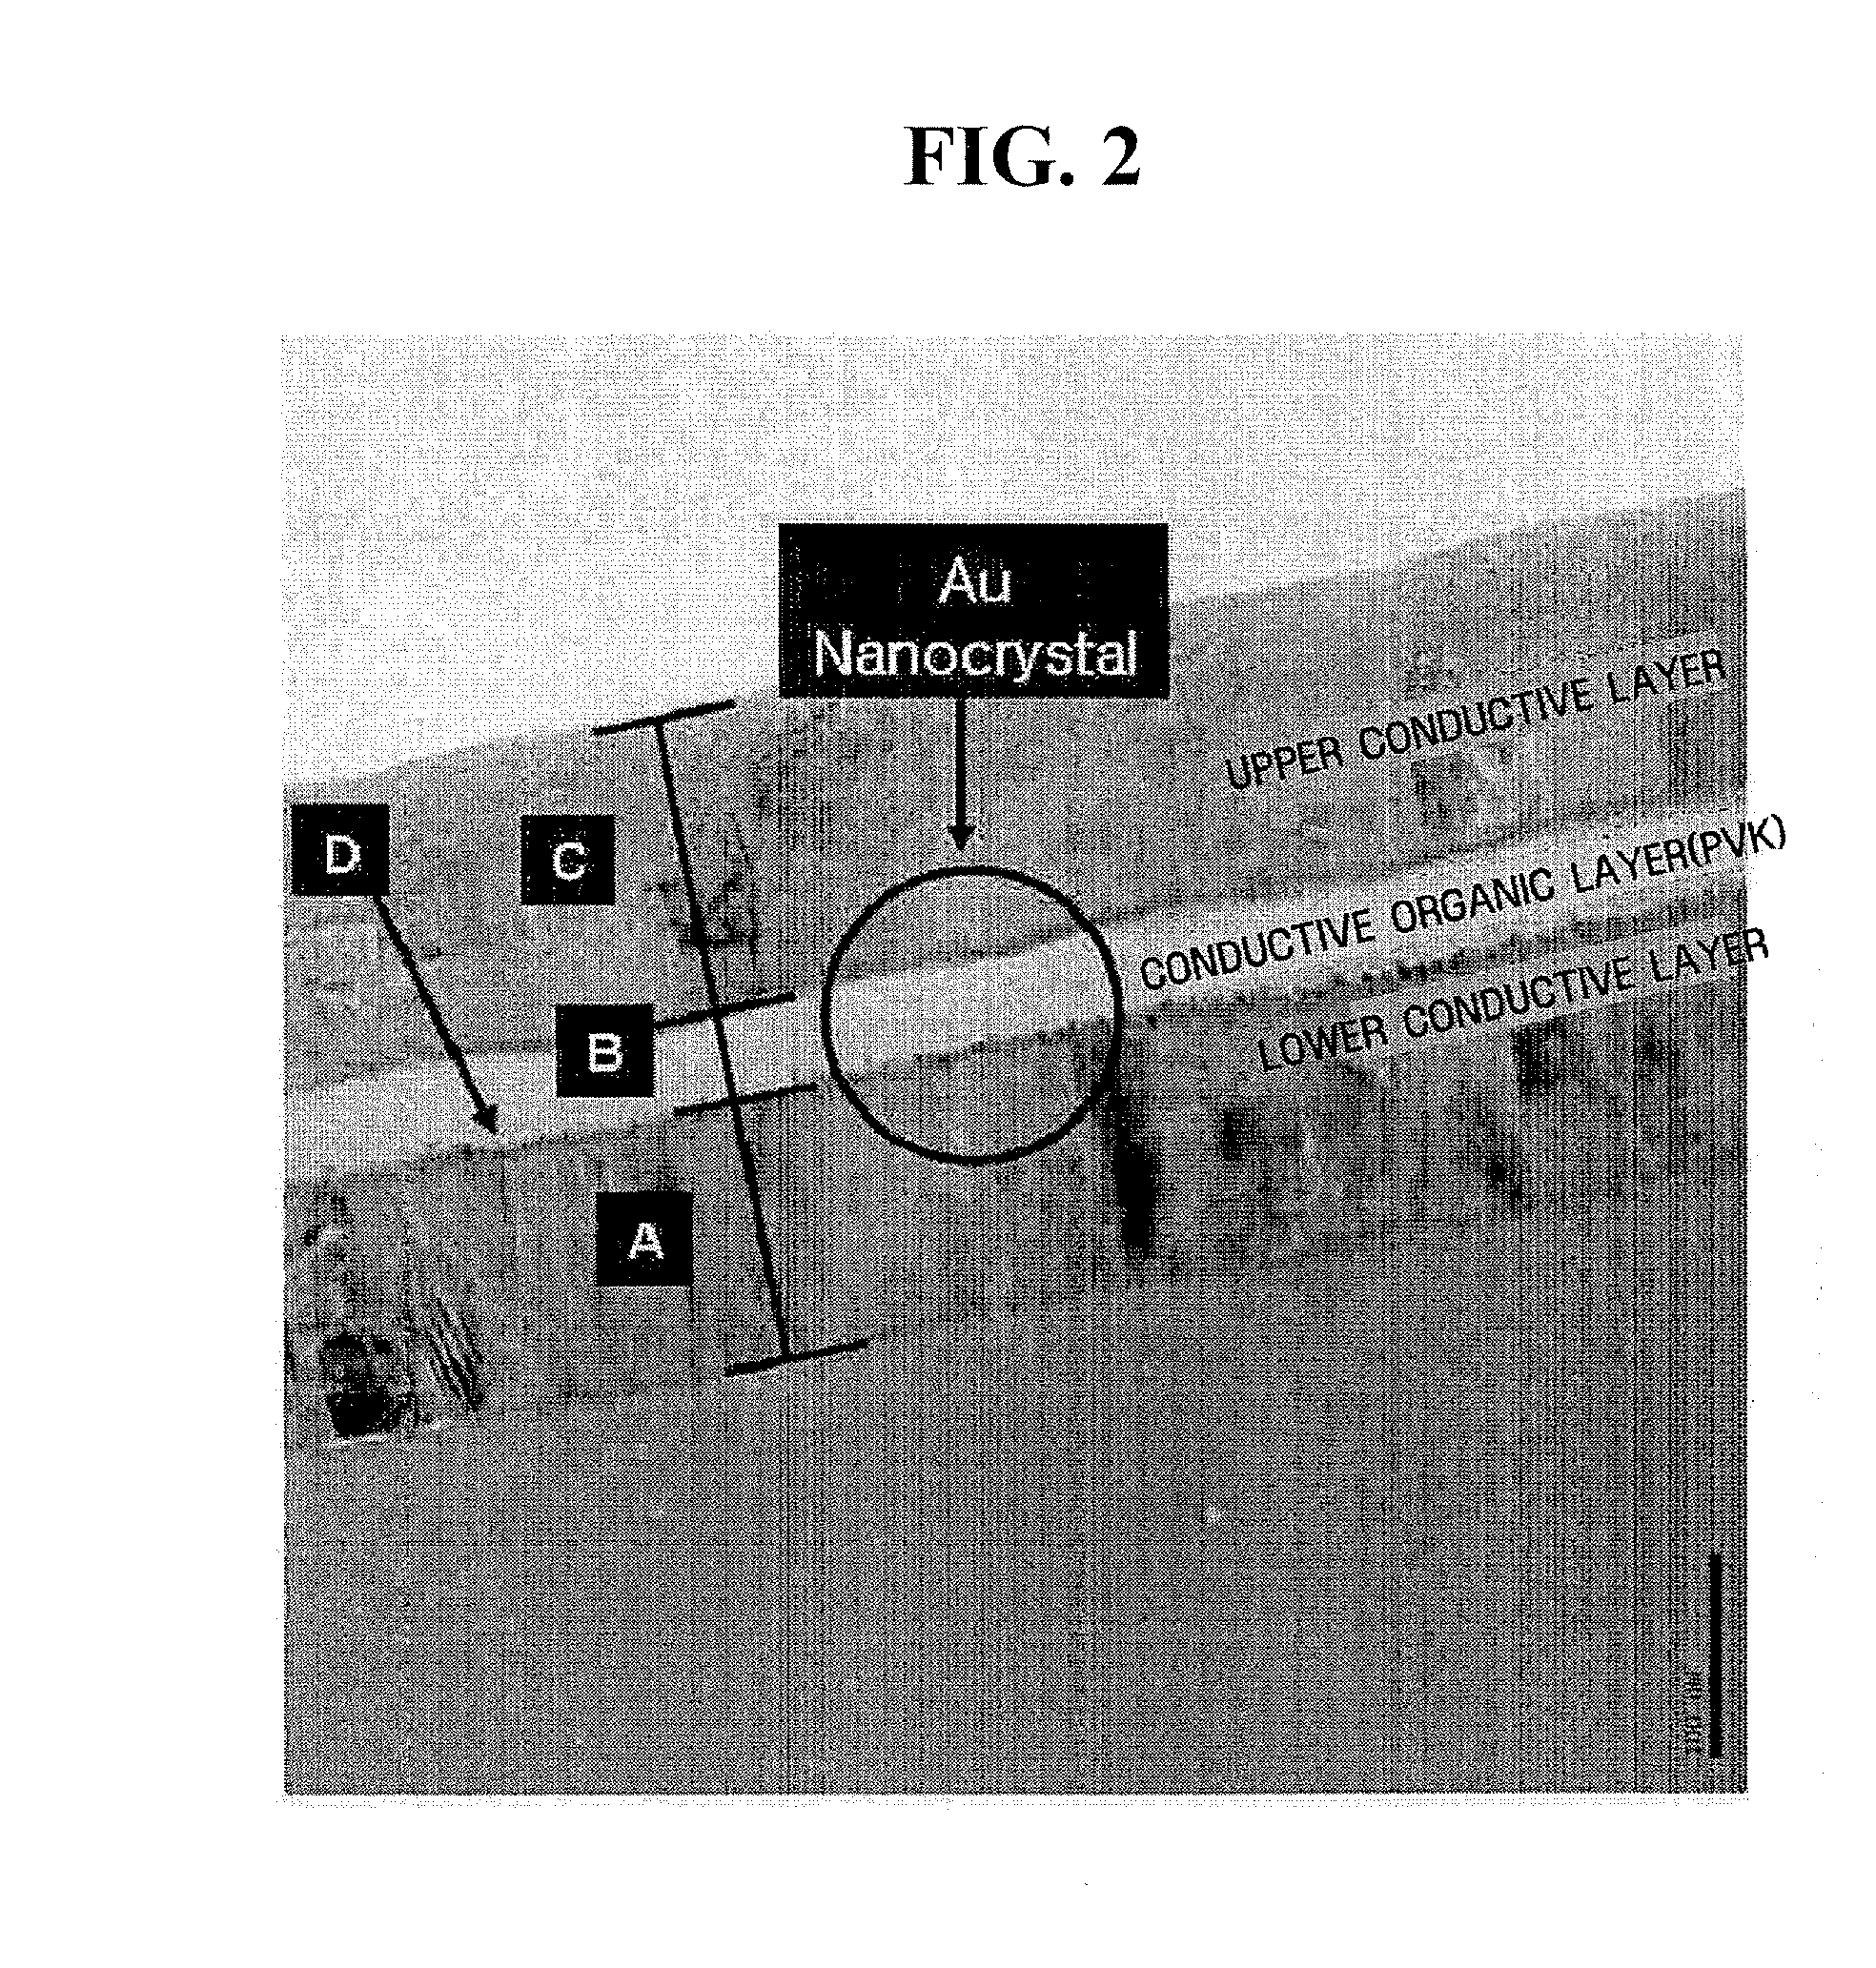 Nonvolatile memory device using conductive organic polymer having nanocrystals embedded therein and method of manufacturing the nonvlatile memory device